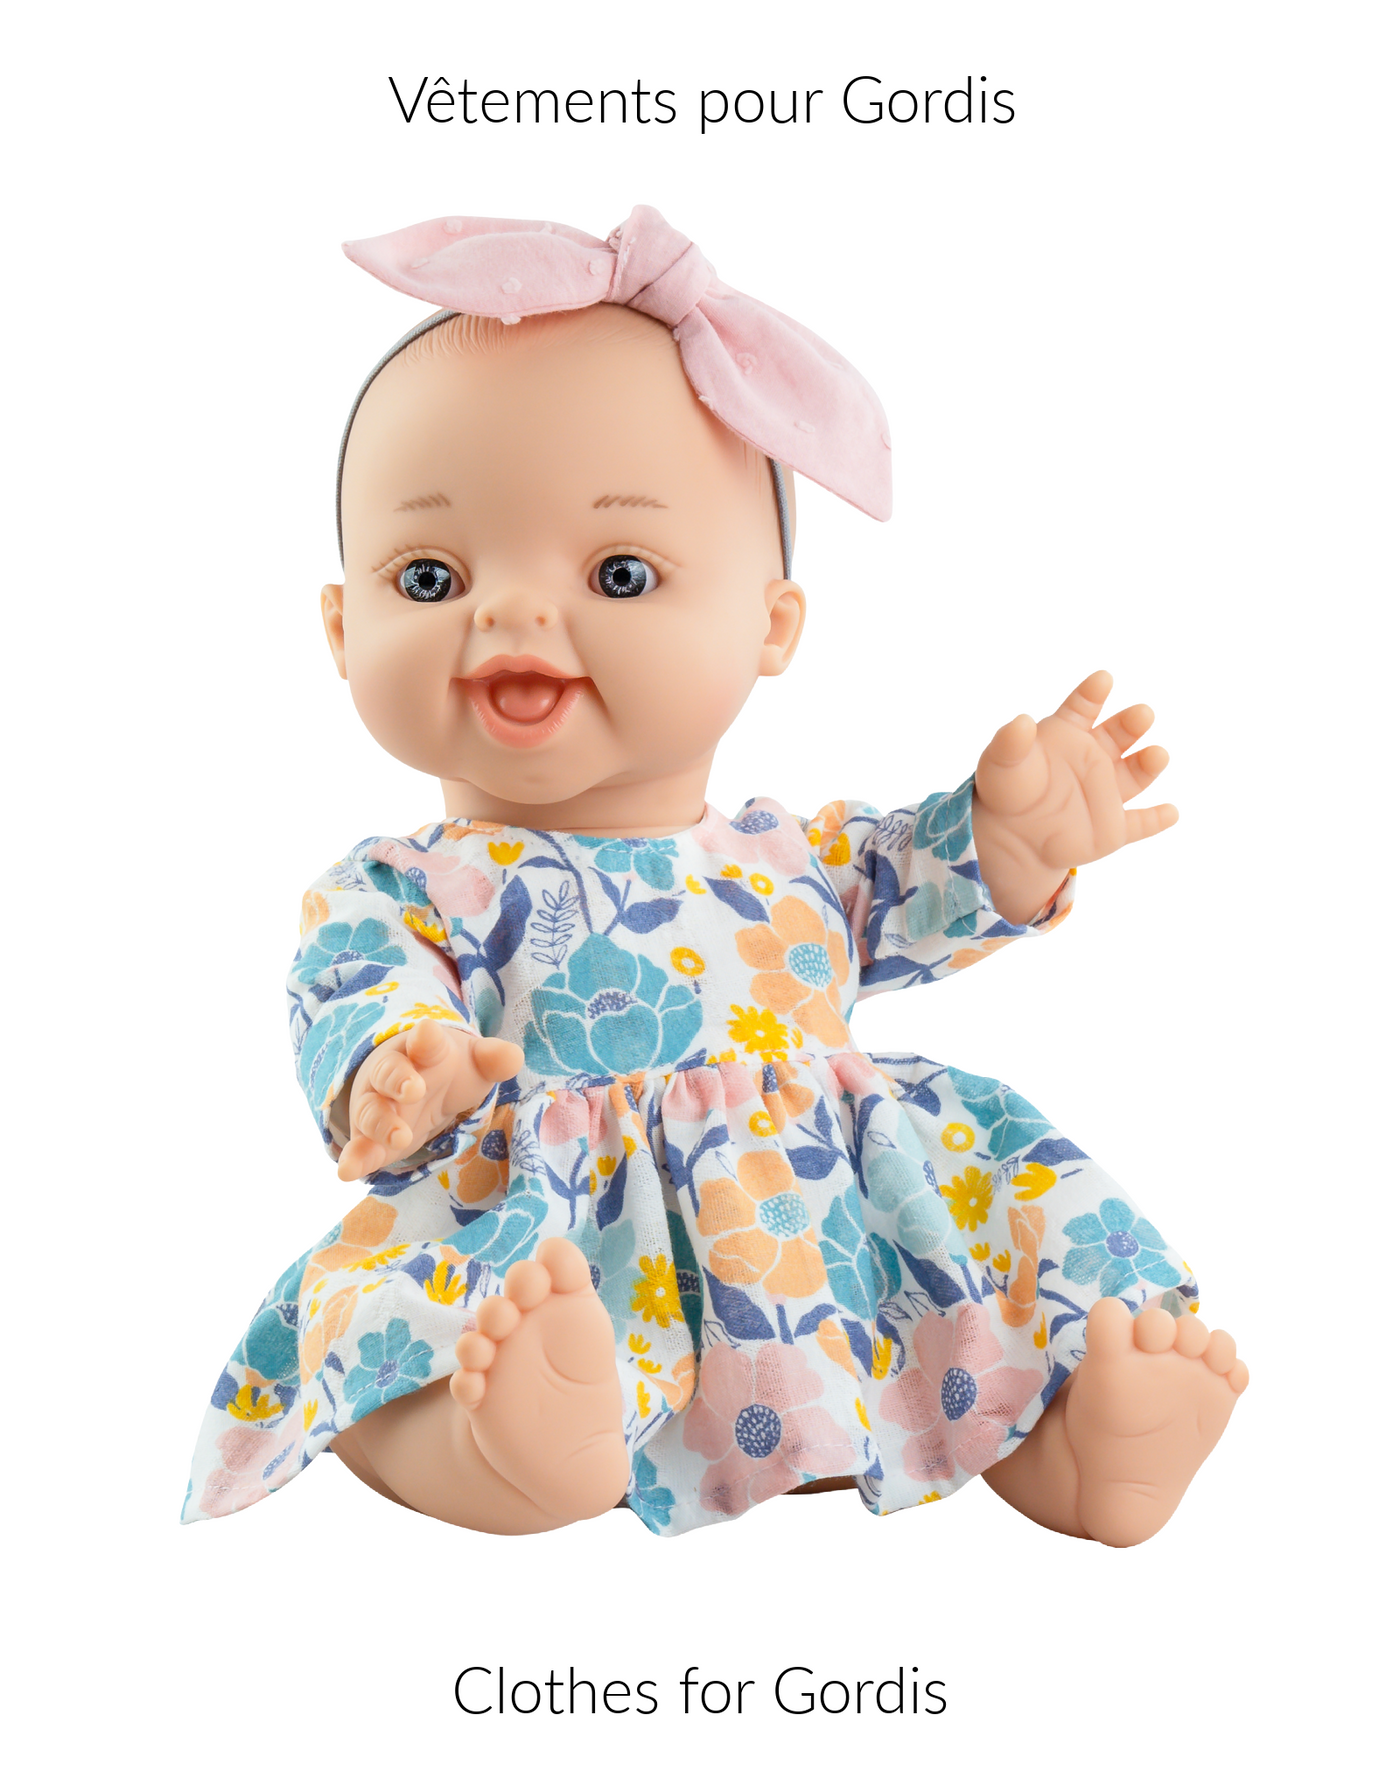 Gordis doll clothes - Floral dress and pink headband - Paola Reina